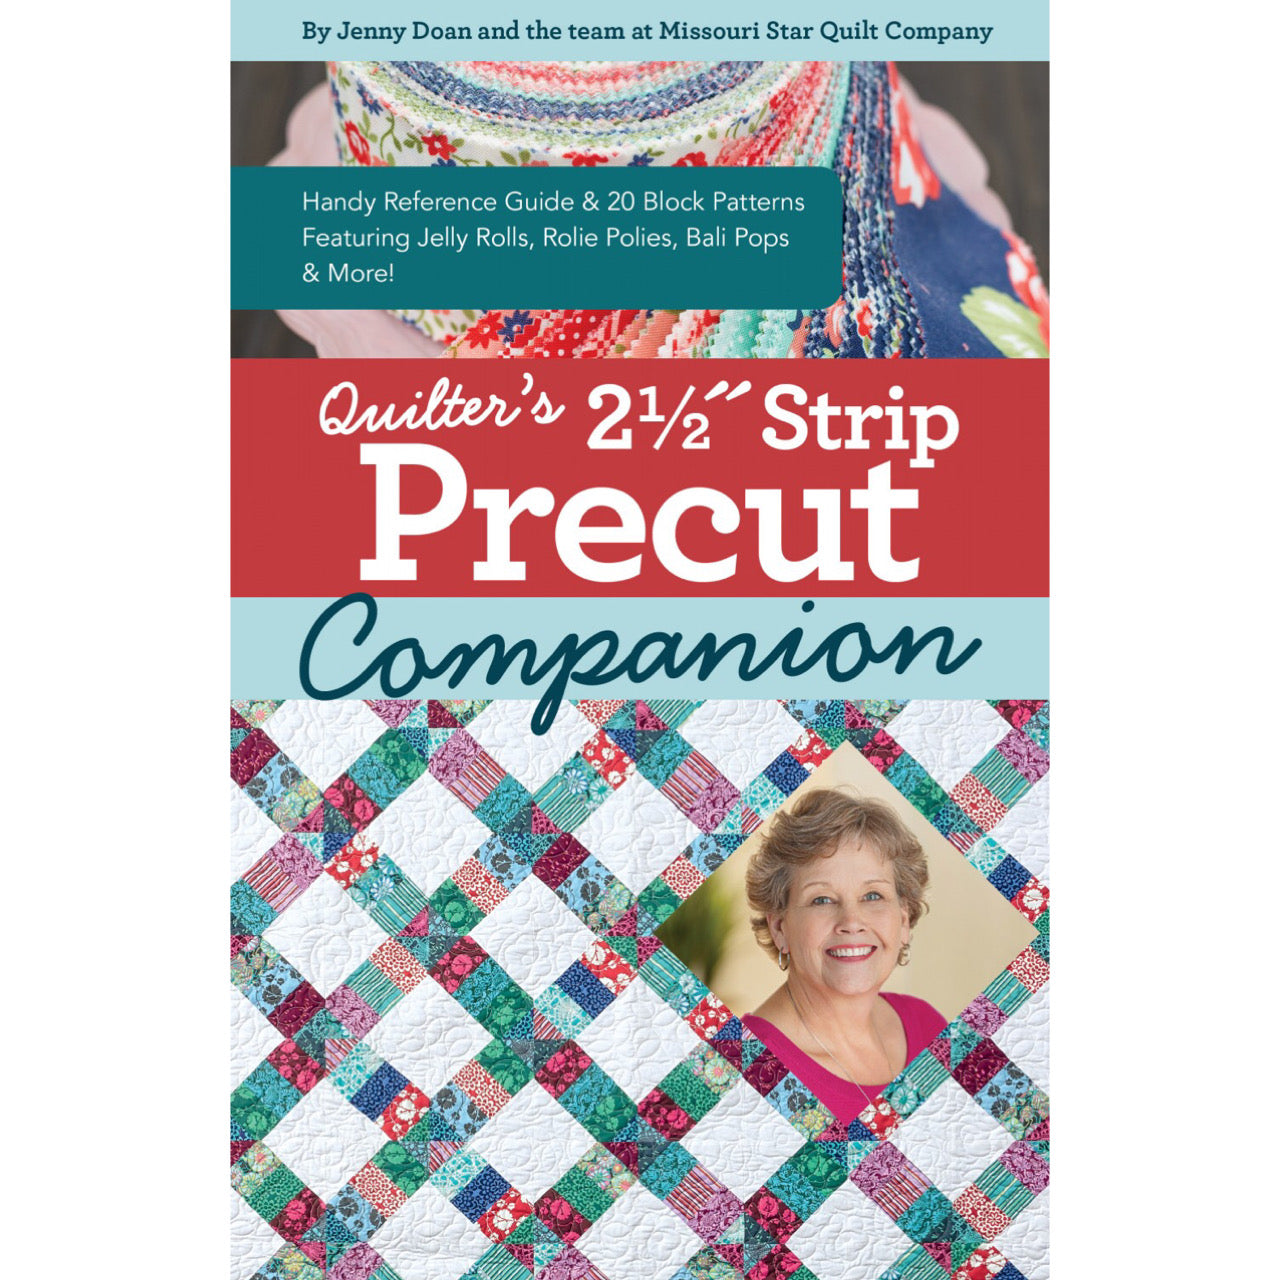 Quilter's 2 1/2” Strip Companion by Jenny Doan